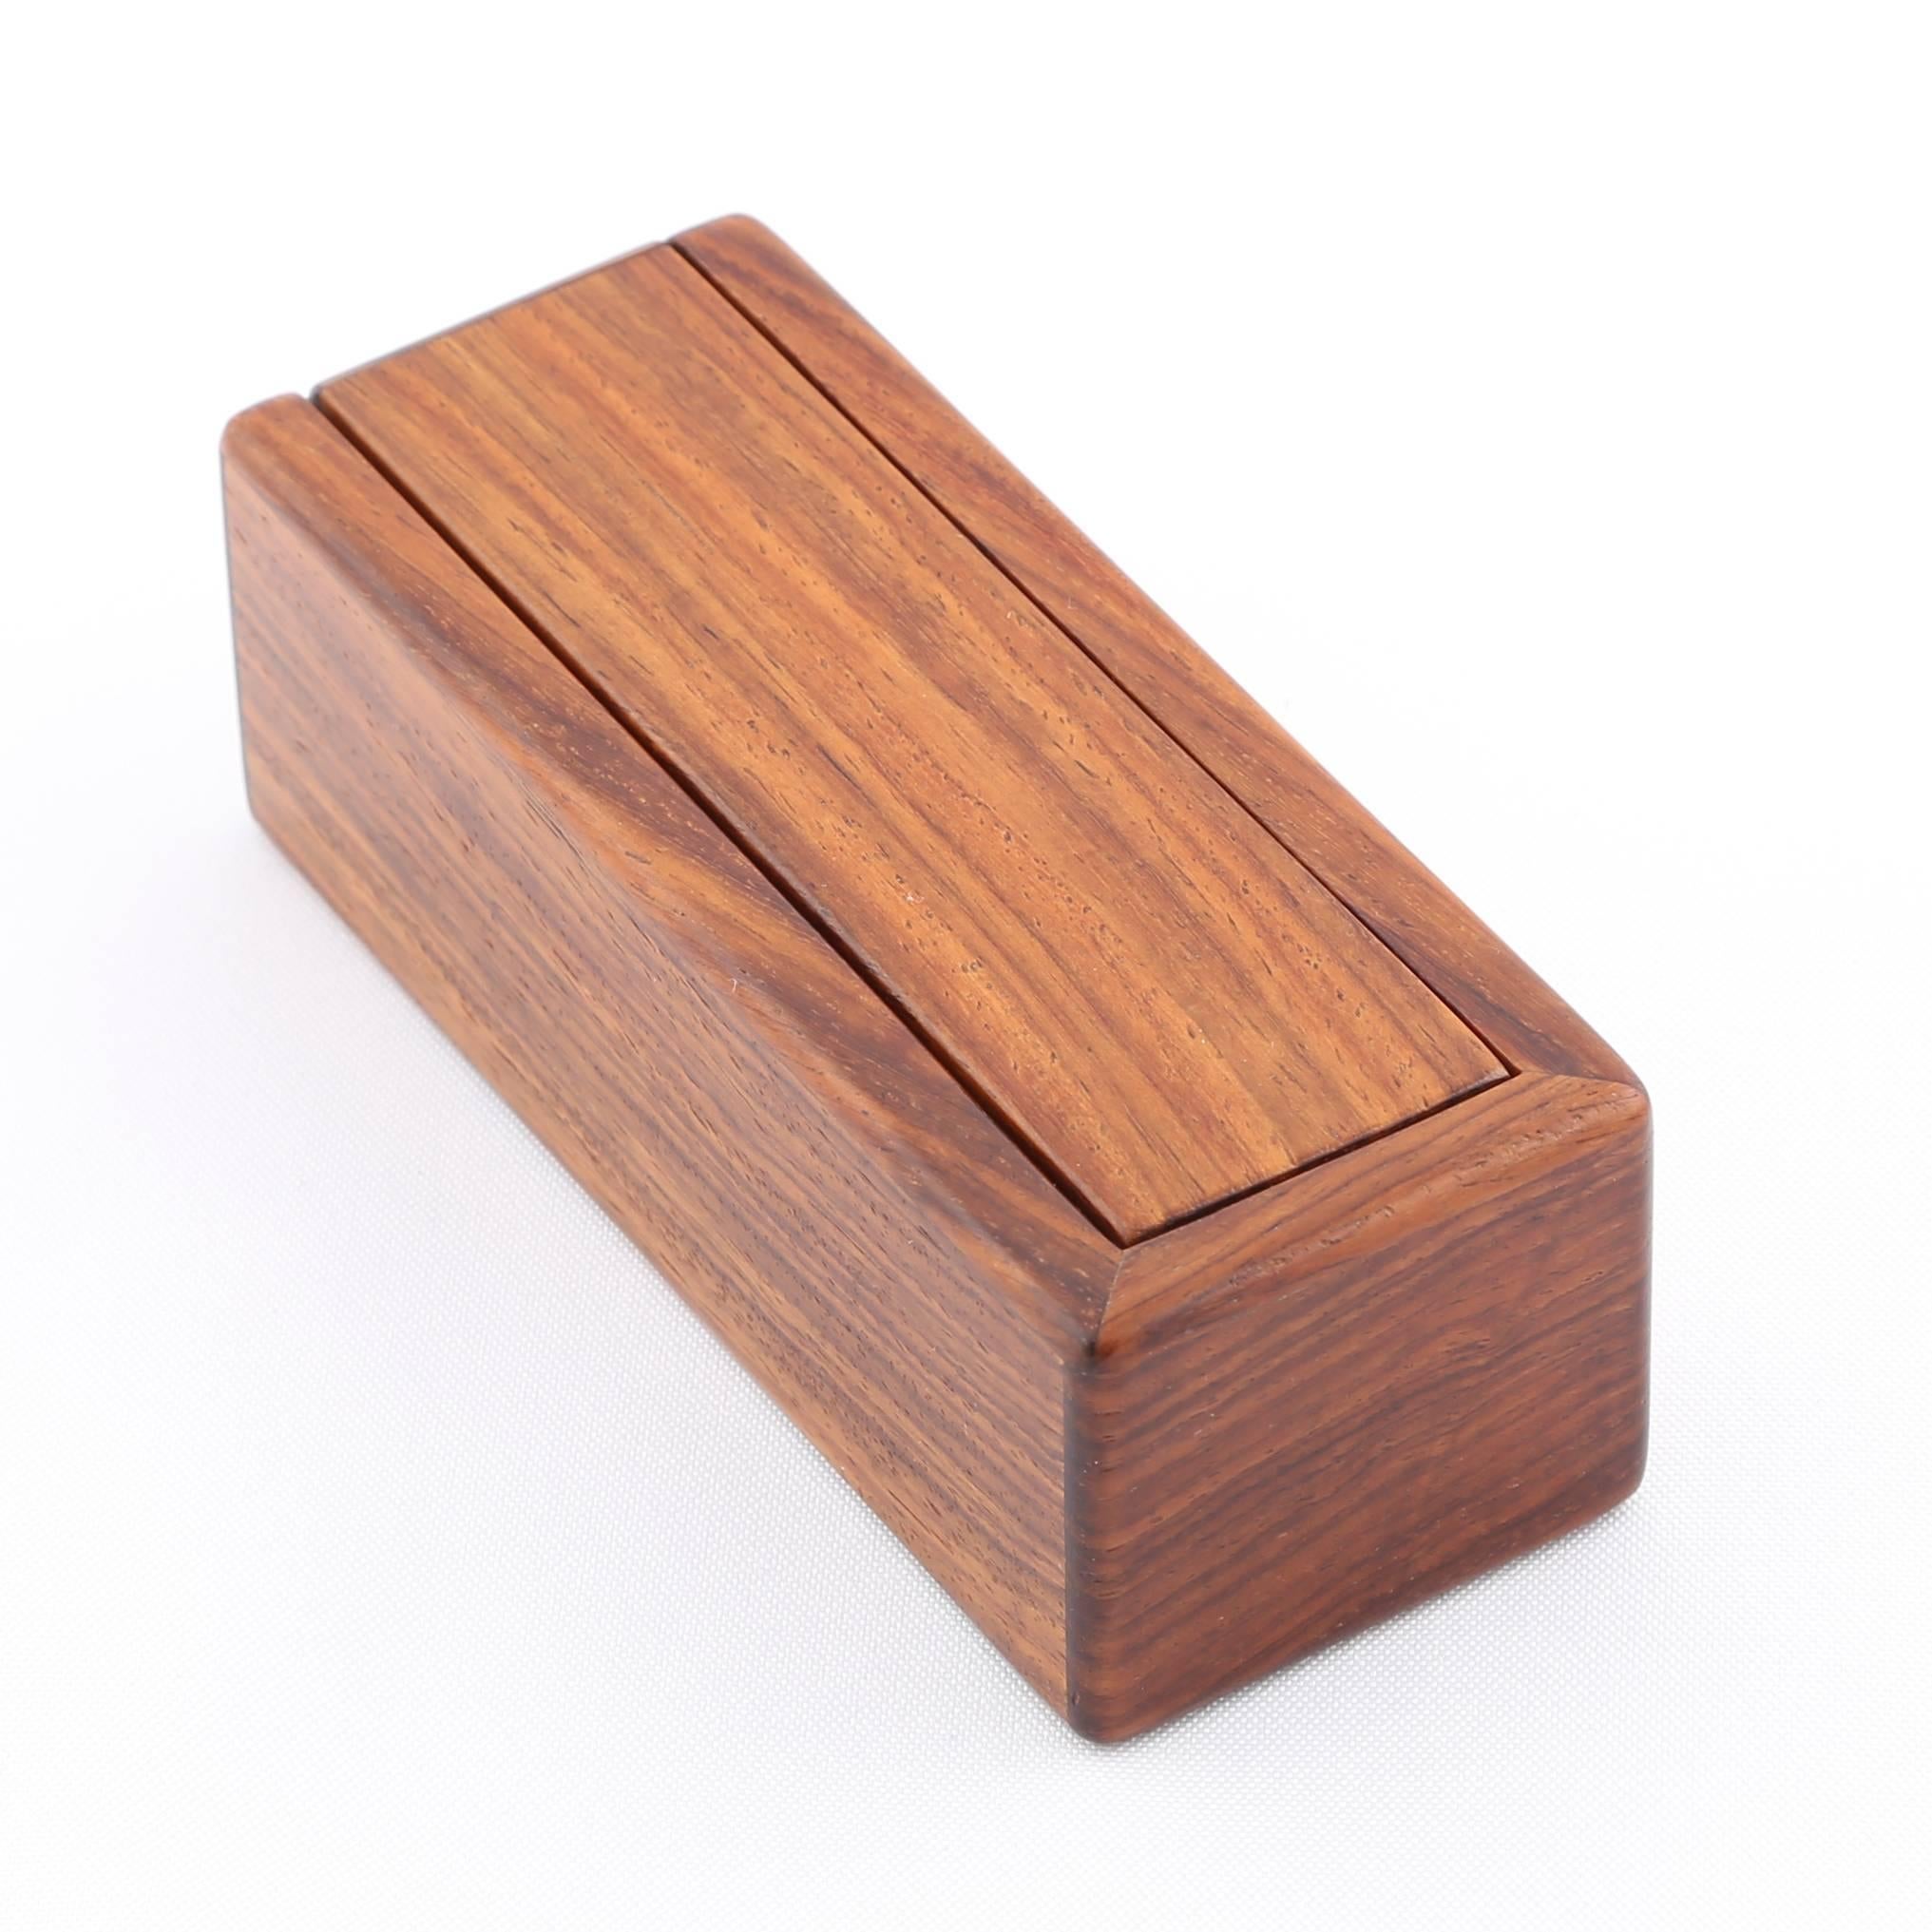 Late 20th Century Wooden Box with Sliding Top by Jerry Madrigale, circa 1980s